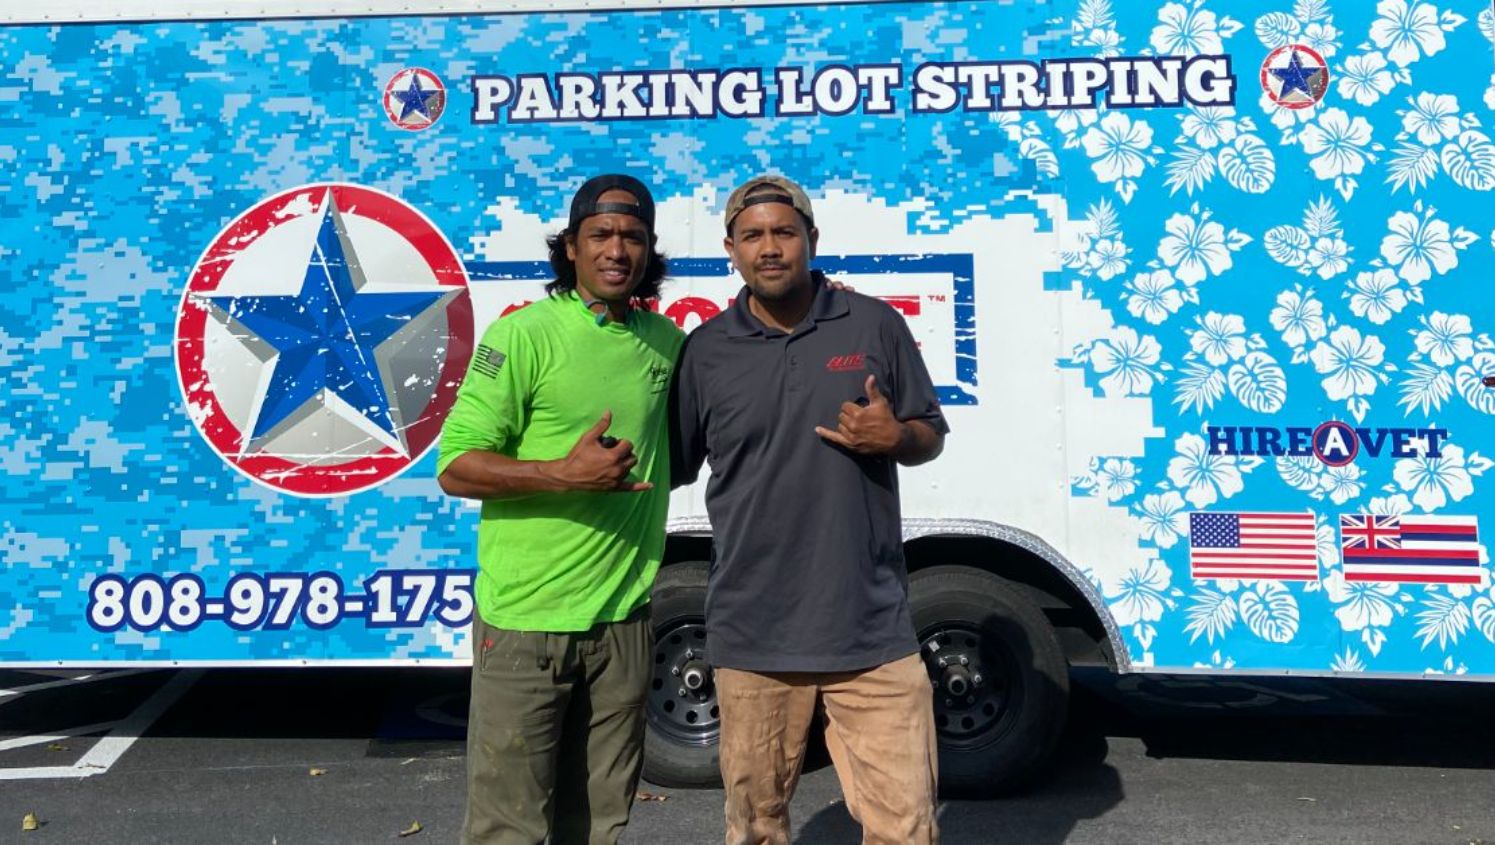 Team Image of G-FORCE Parking Lot Striping O'ahu